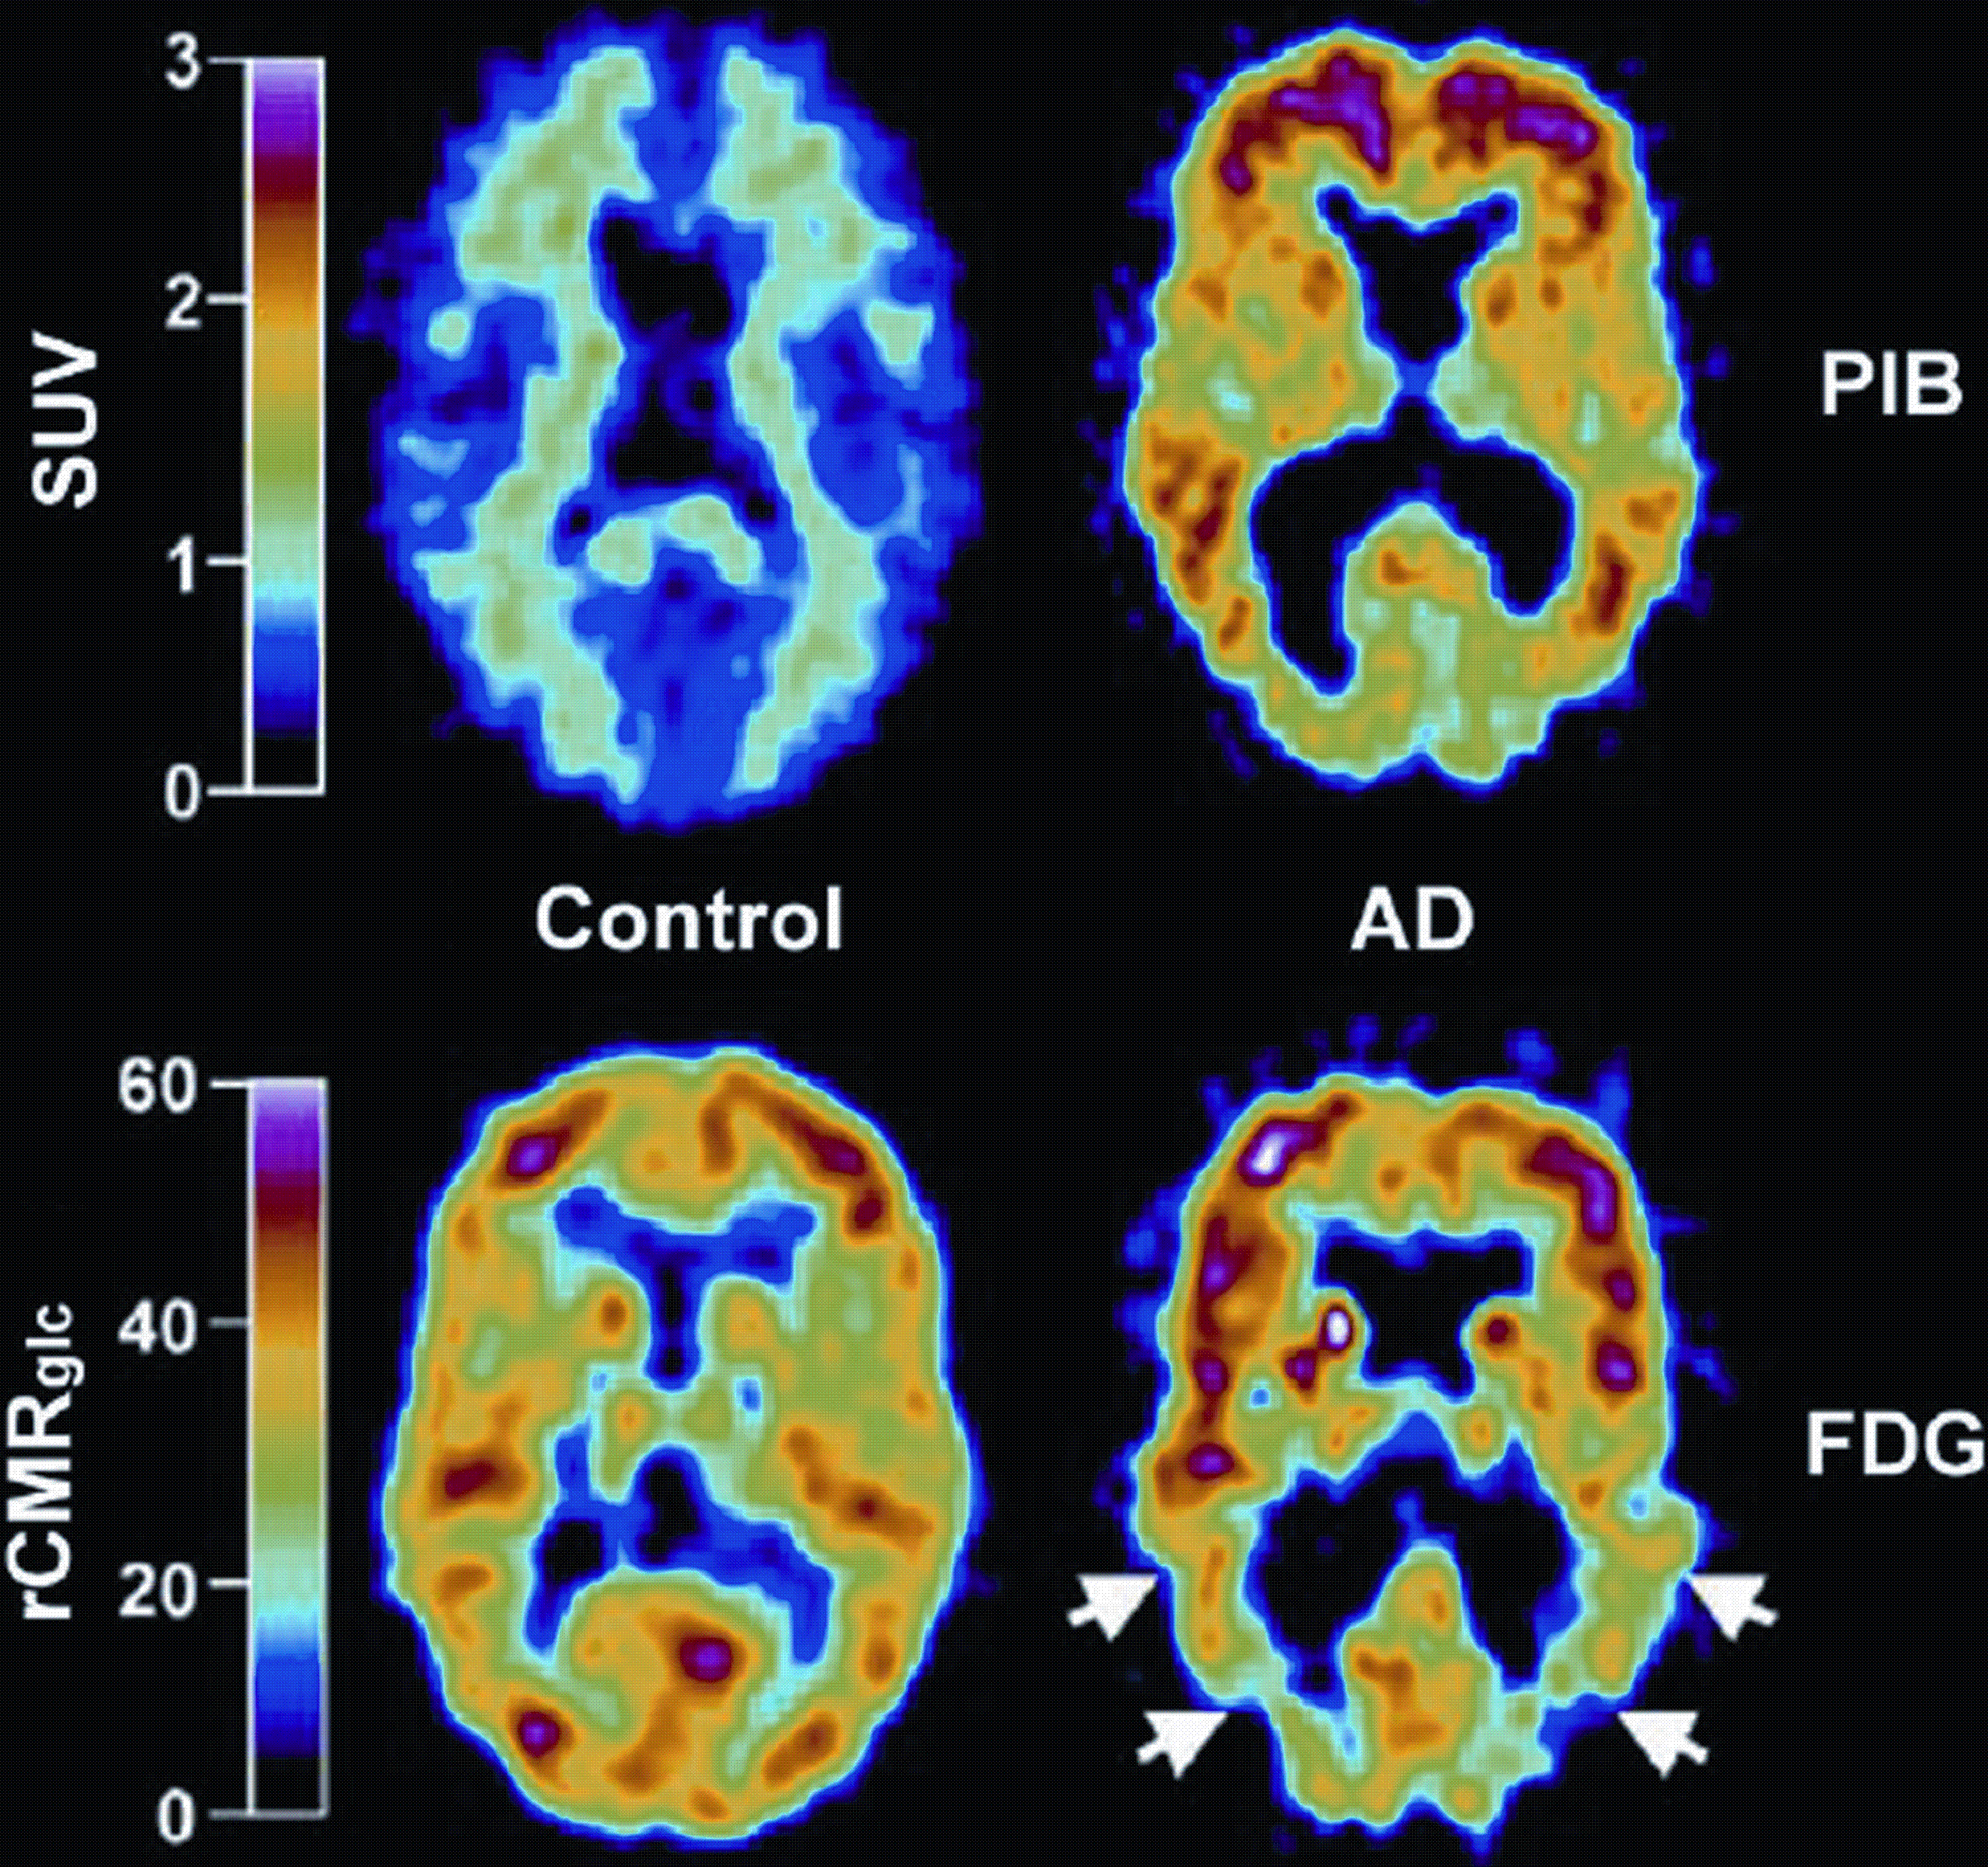 Amyloid Imaging with PET in Alzheimerâs Disease, Mild Cognitive ...